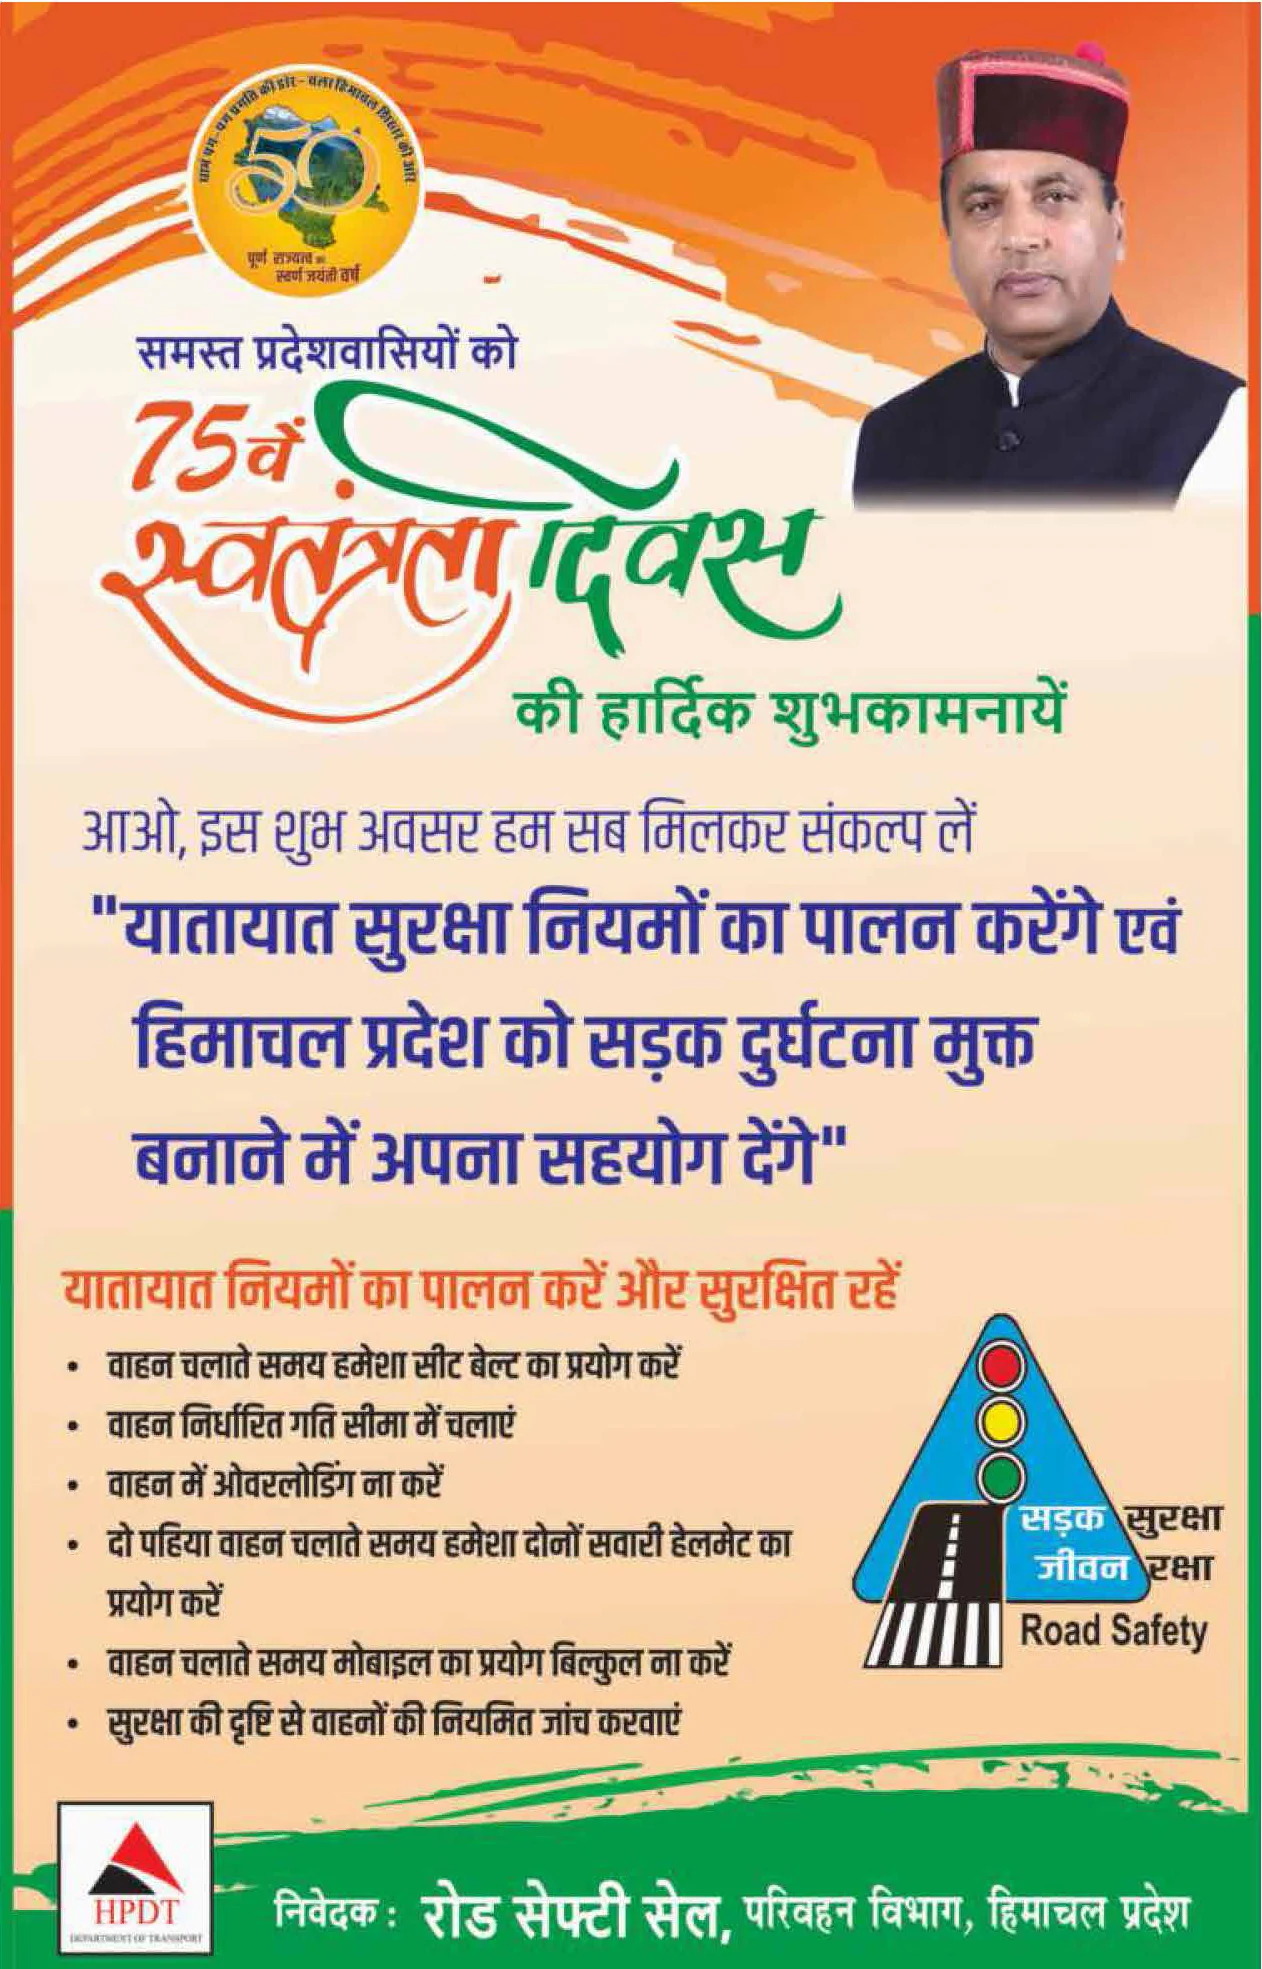 #13 Himachal Govt. on the occasion of 75th Independence day